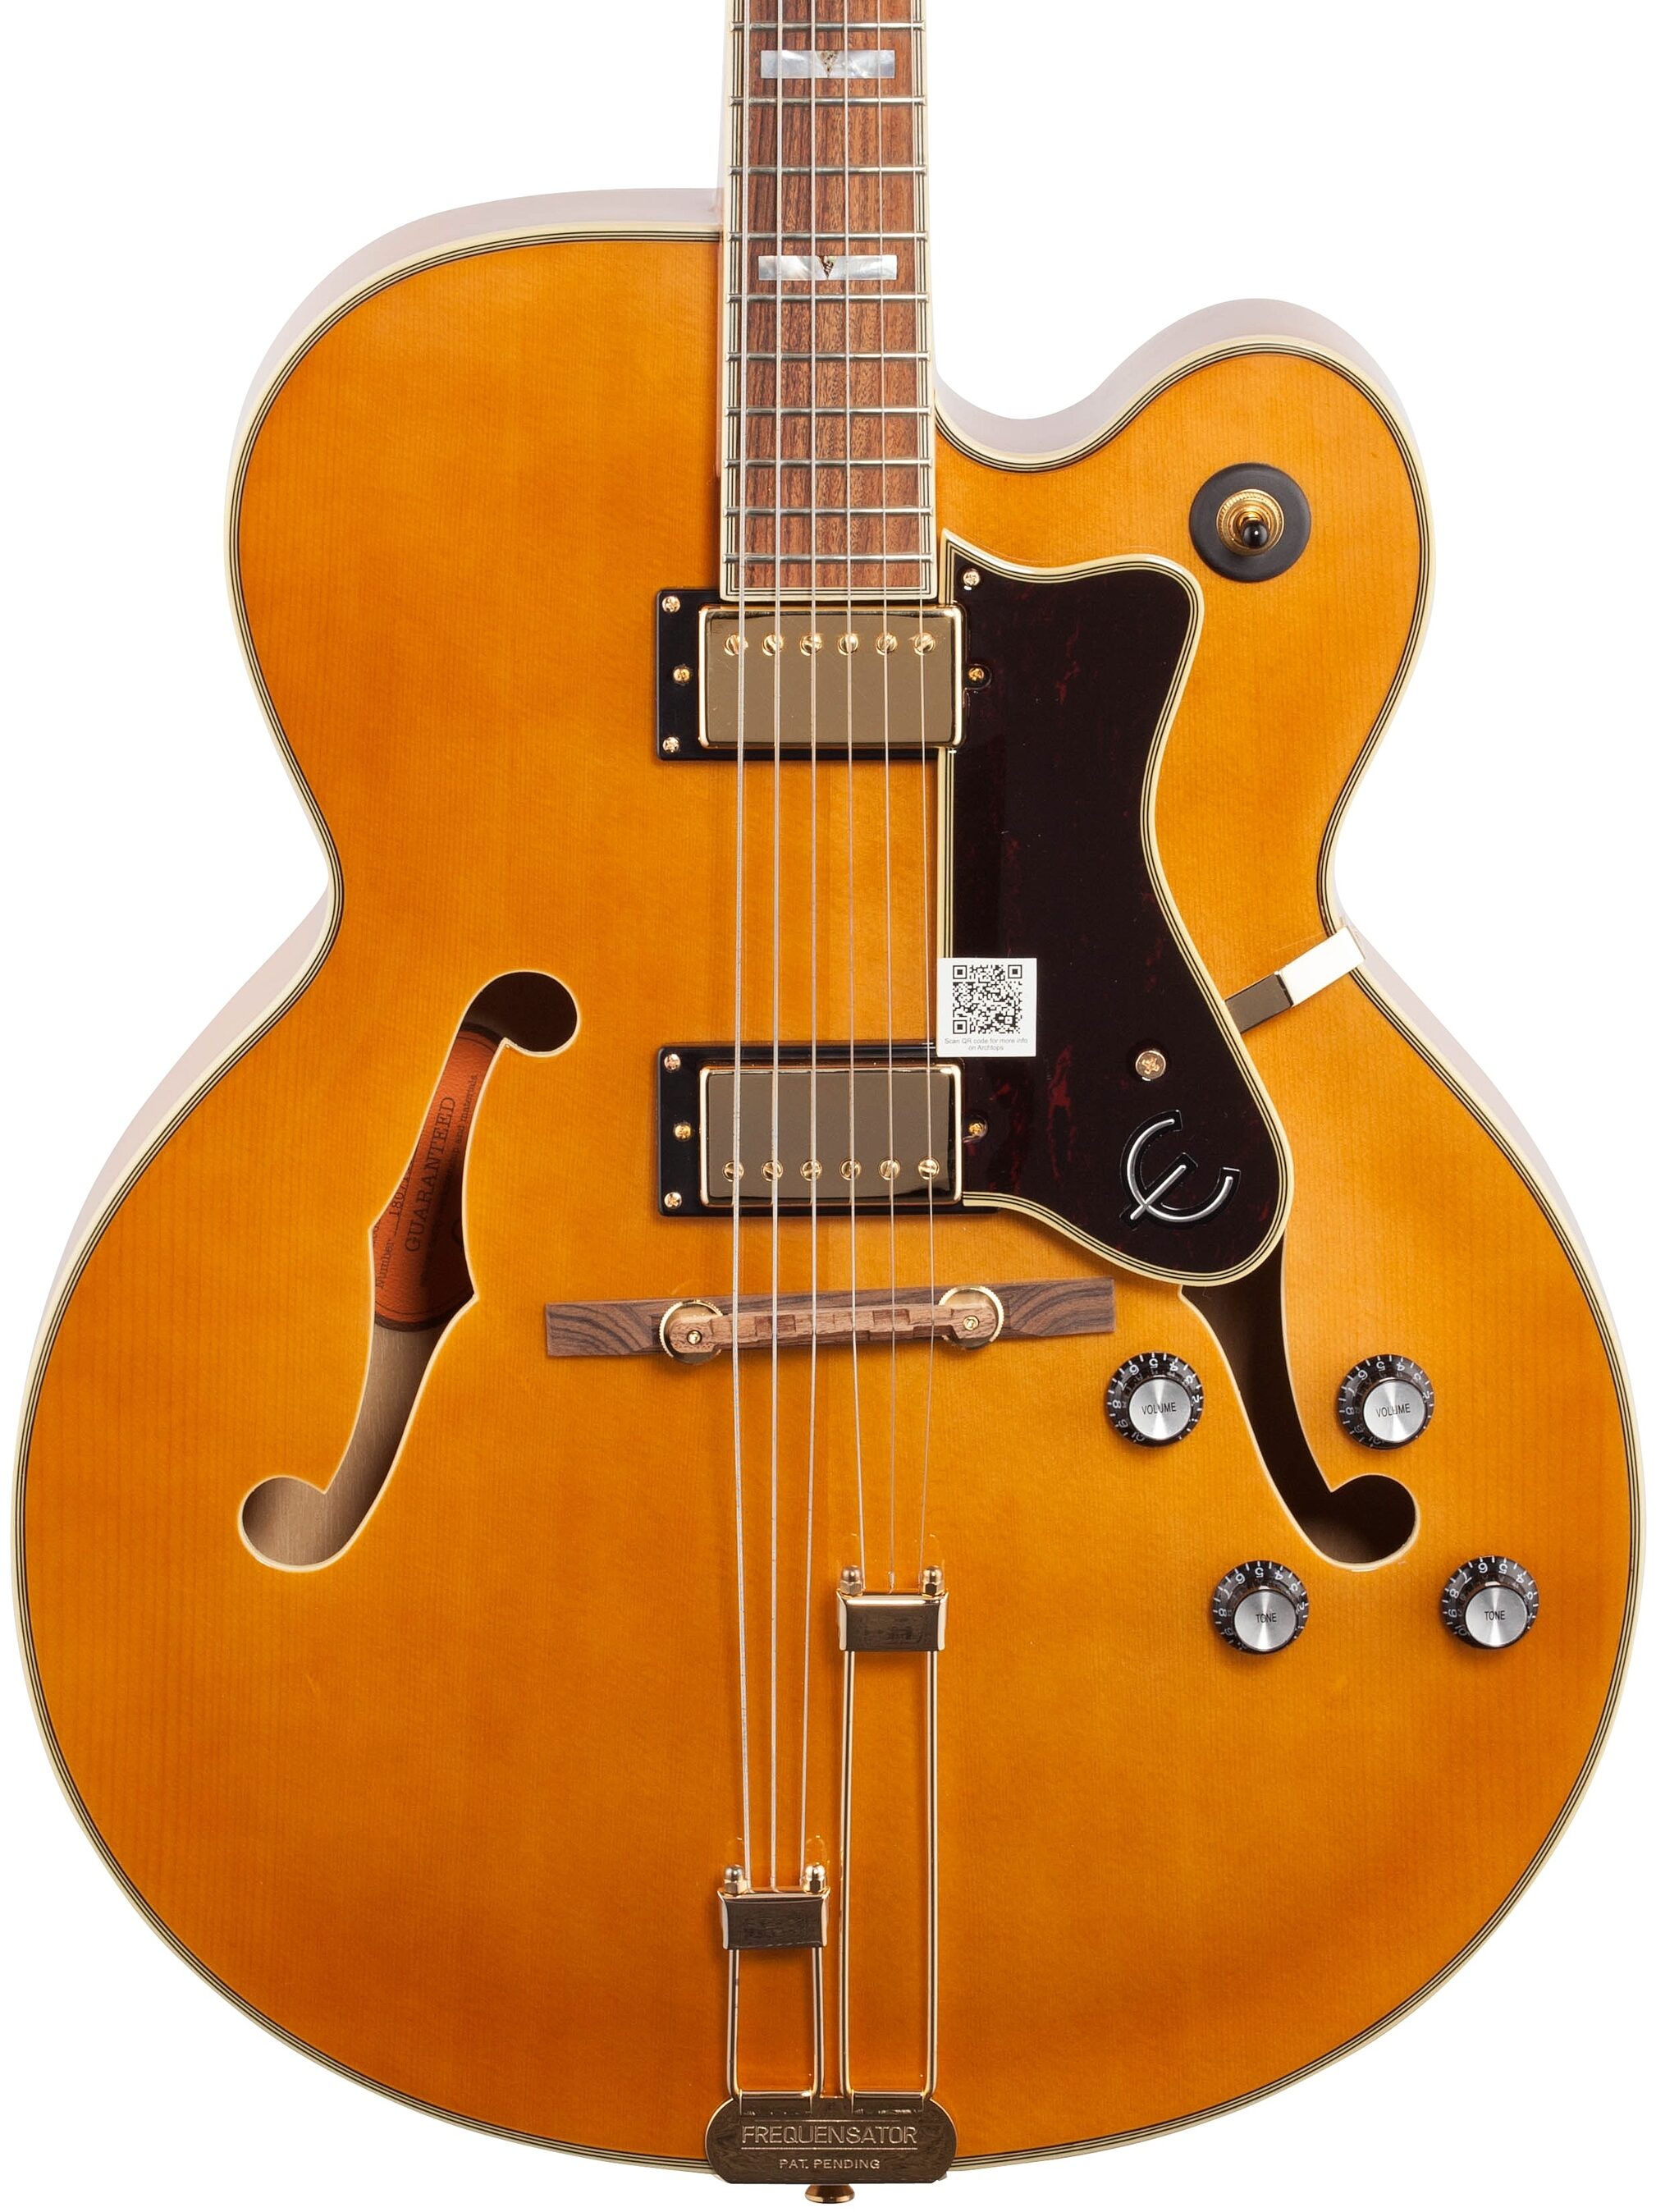 Epiphone Broadway Hollowbody Electric Guitar | zZounds